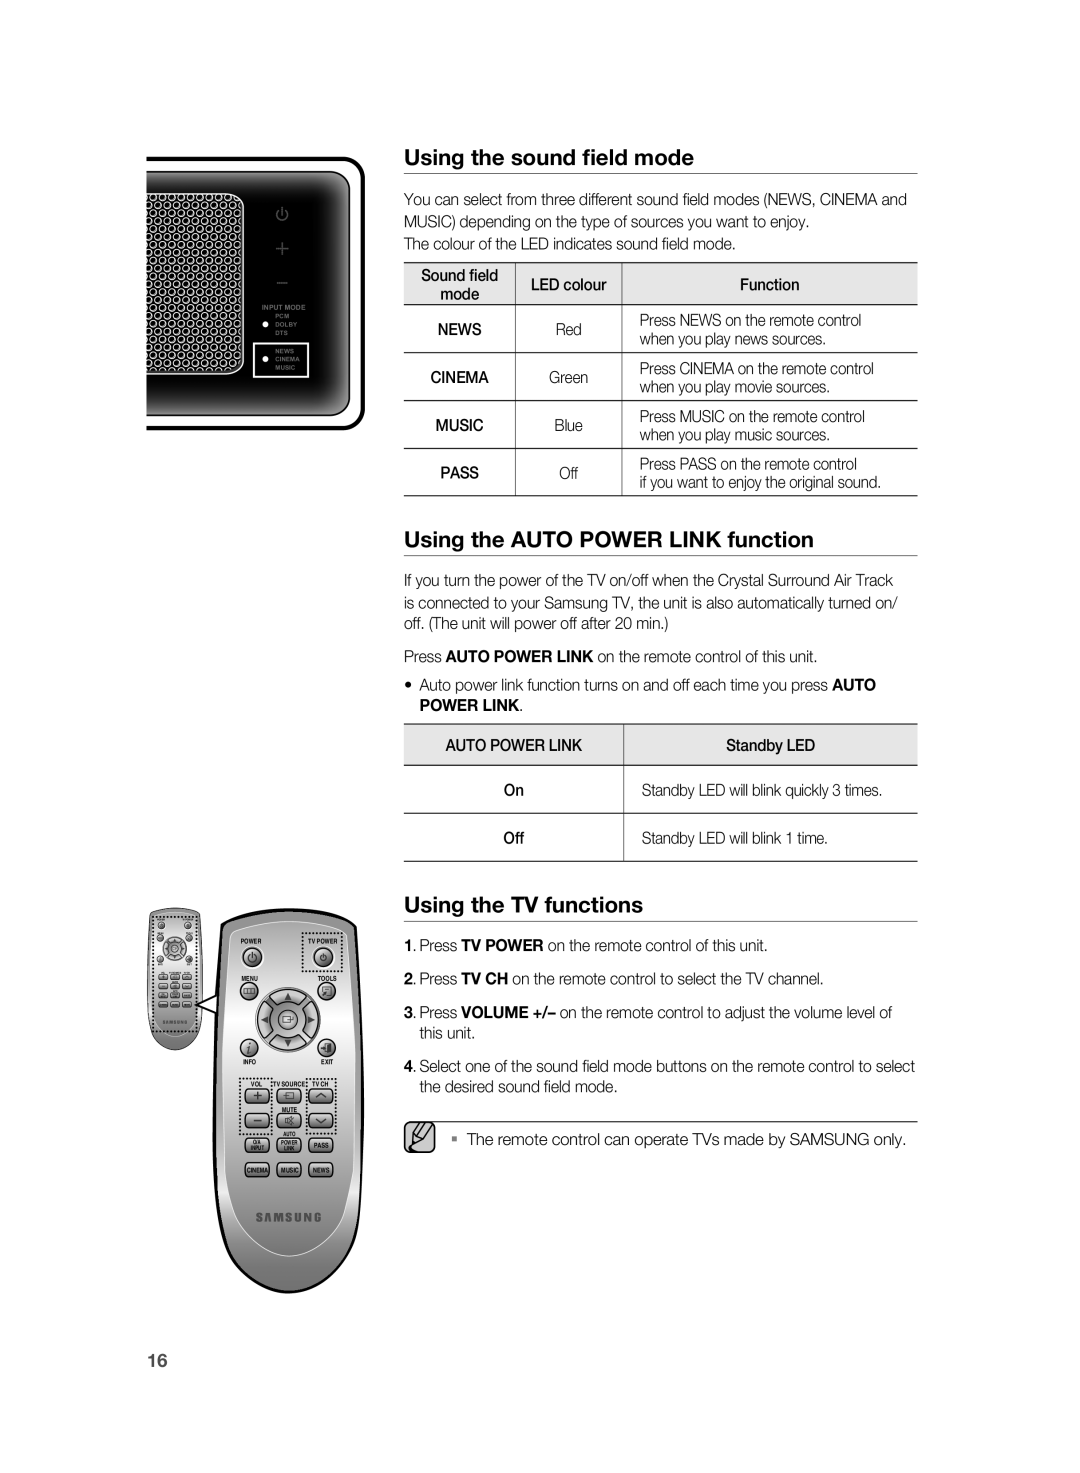 Samsung AH68-02184F user manual Using the sound field mode, Using the AUTO POWER LINK function, Using the TV functions 